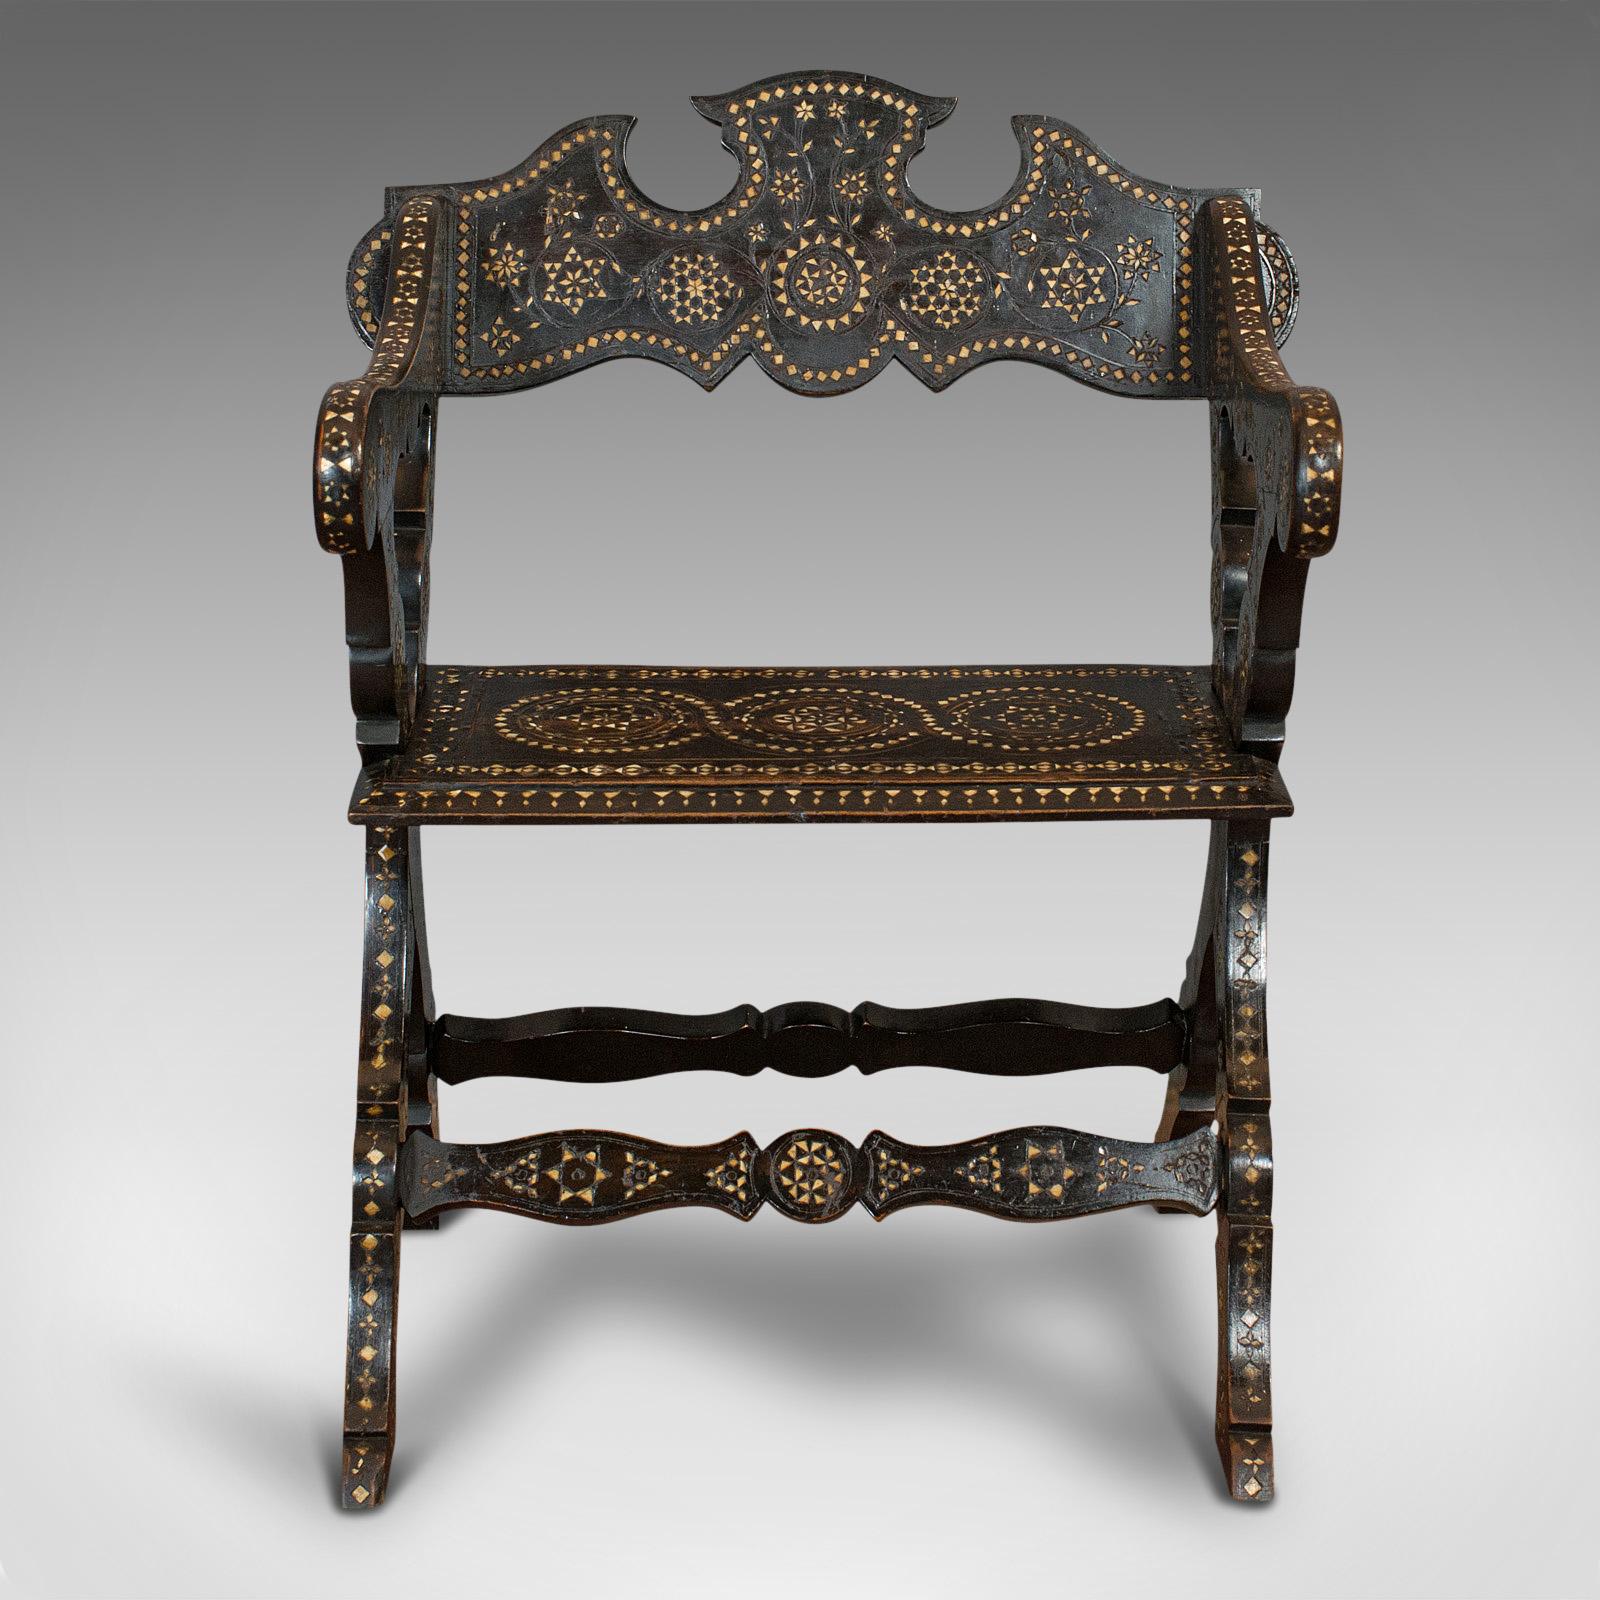 This is an antique X-frame chair. A Middle Eastern, ebonised mahogany seat with elaborate bone inlay, dating to the mid-19th century, circa 1850.

Extraordinary decoration and form
Displays a desirable aged patina
Stunning in its ebonised